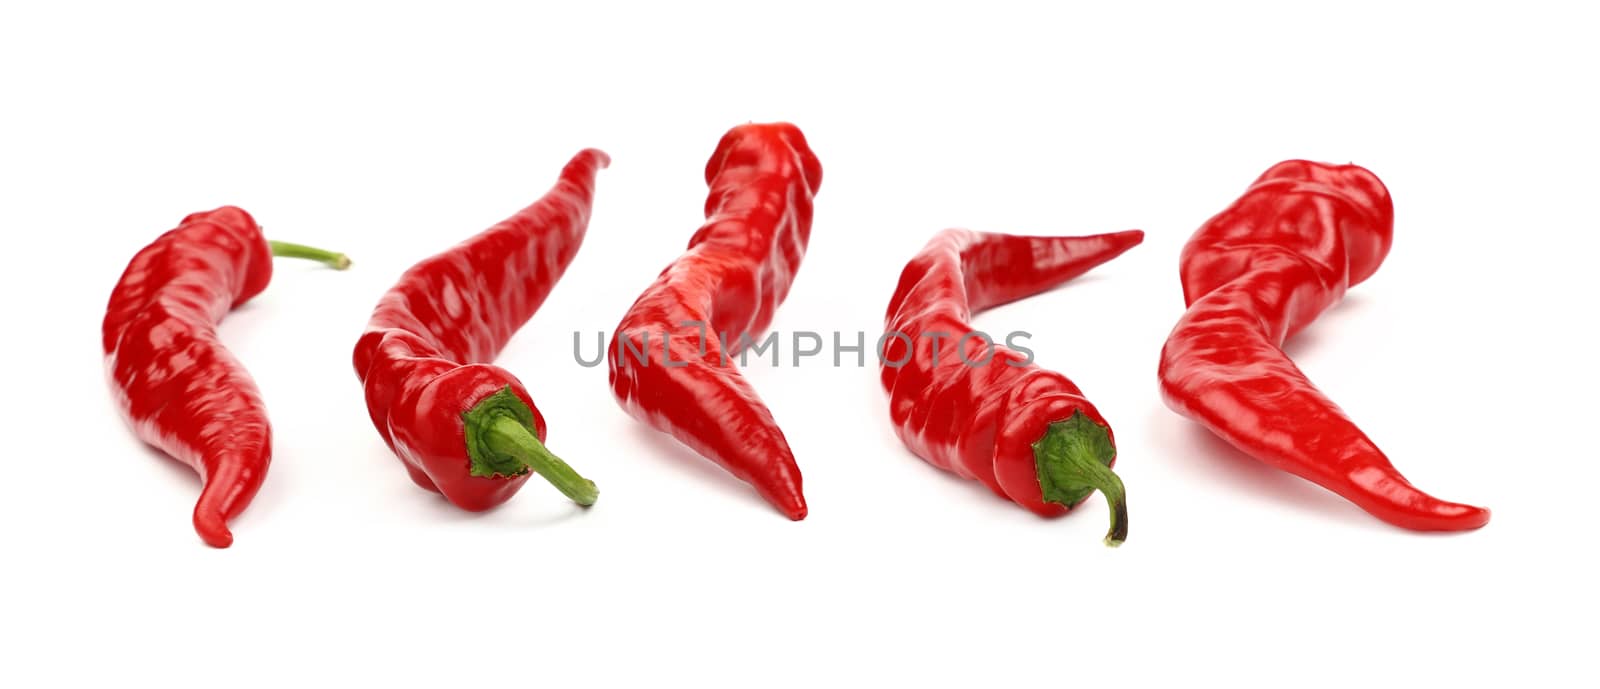 Red hot chili peppers close up isolated on white by BreakingTheWalls